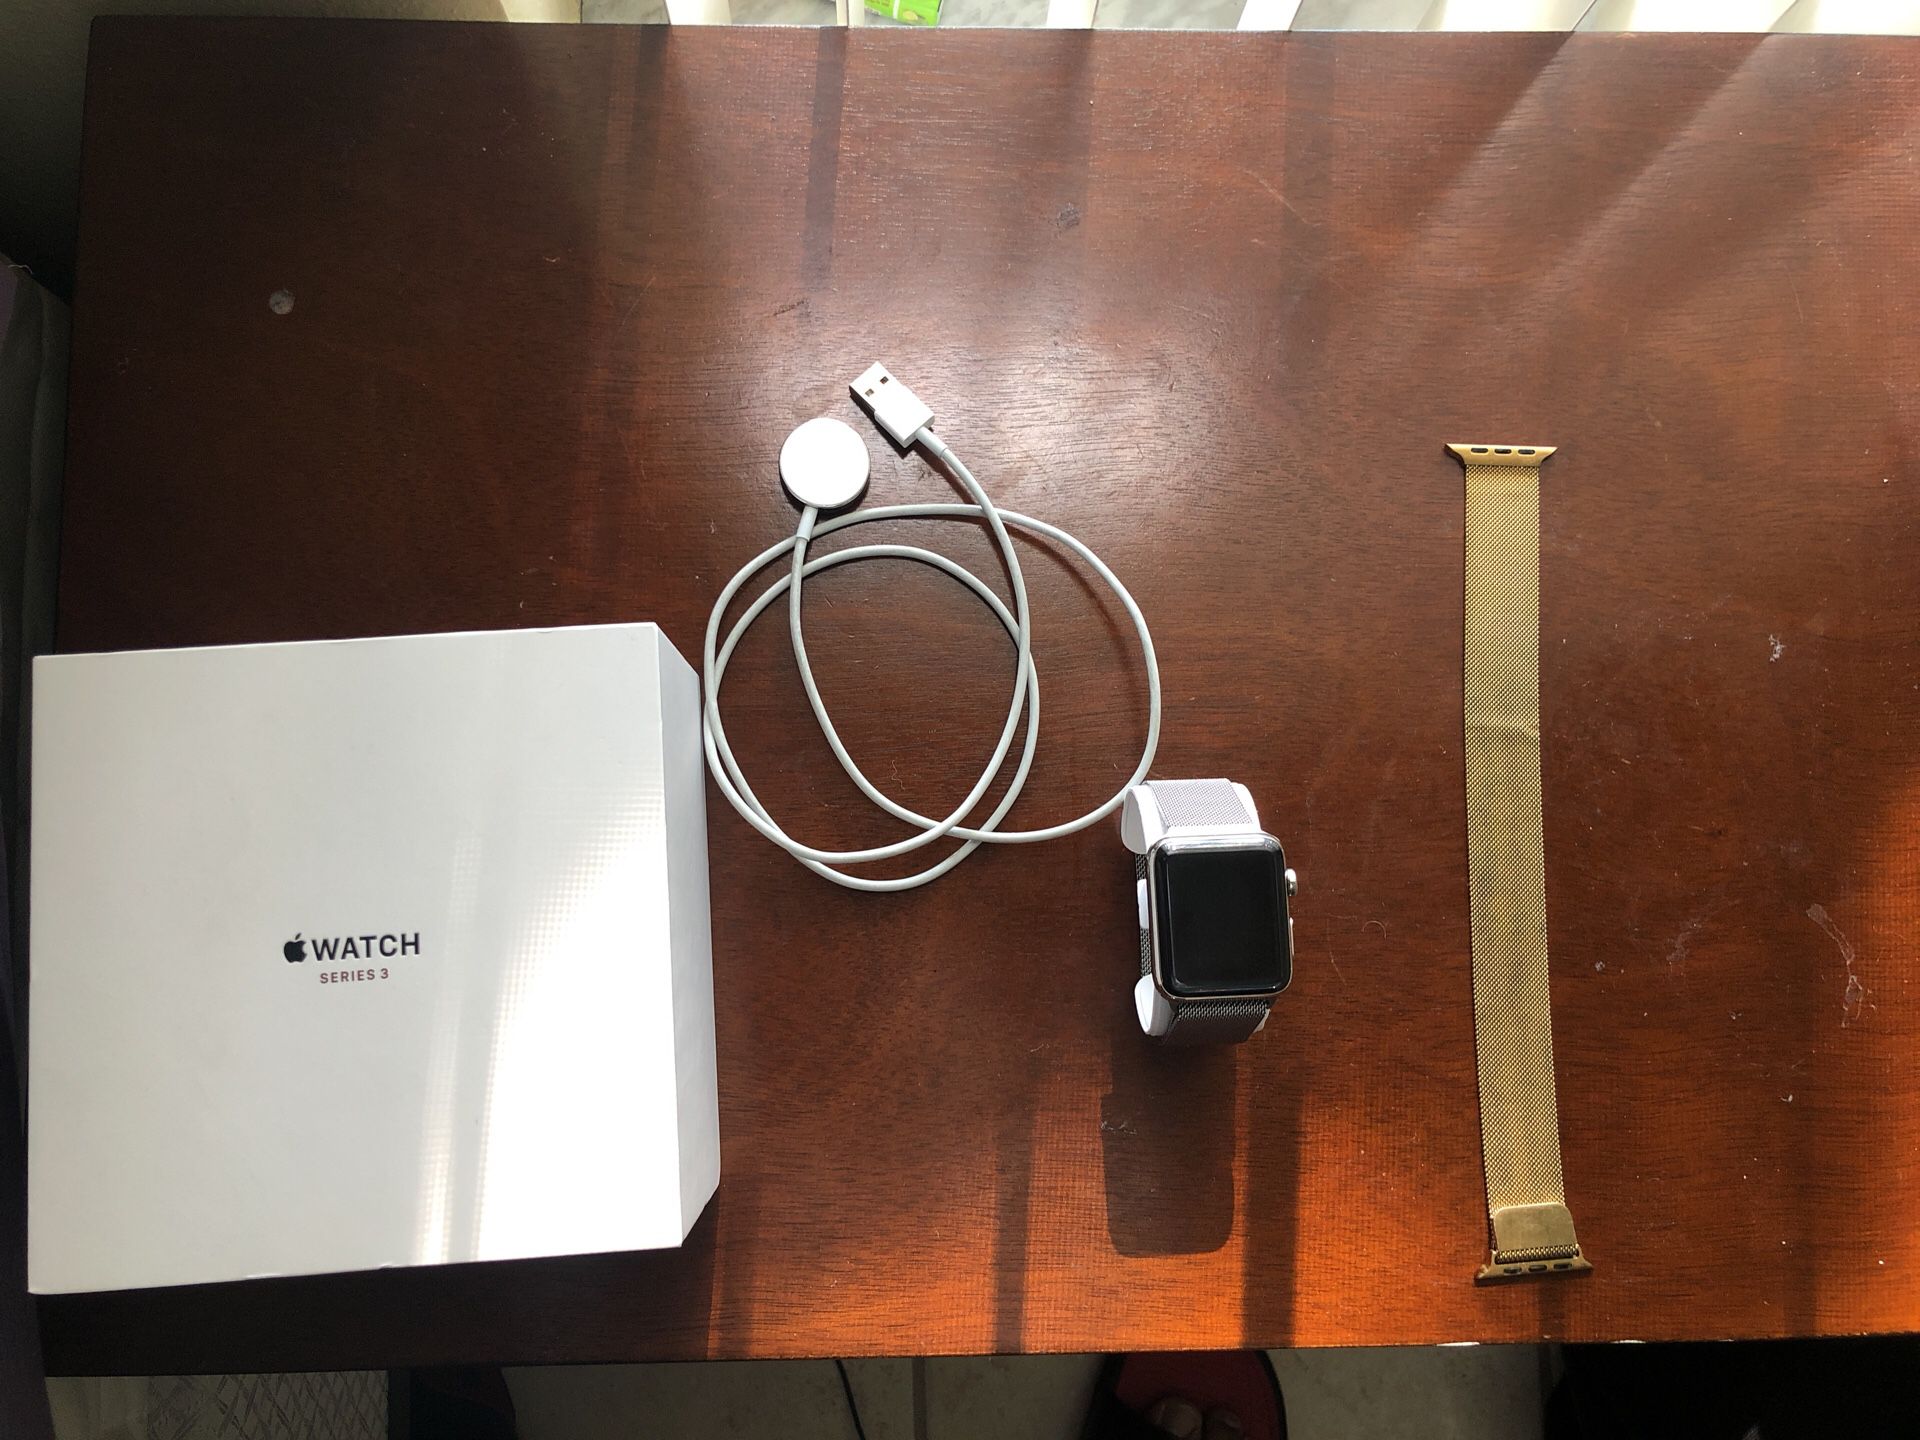 Series 3 Apple Watch with GPS and Cellular